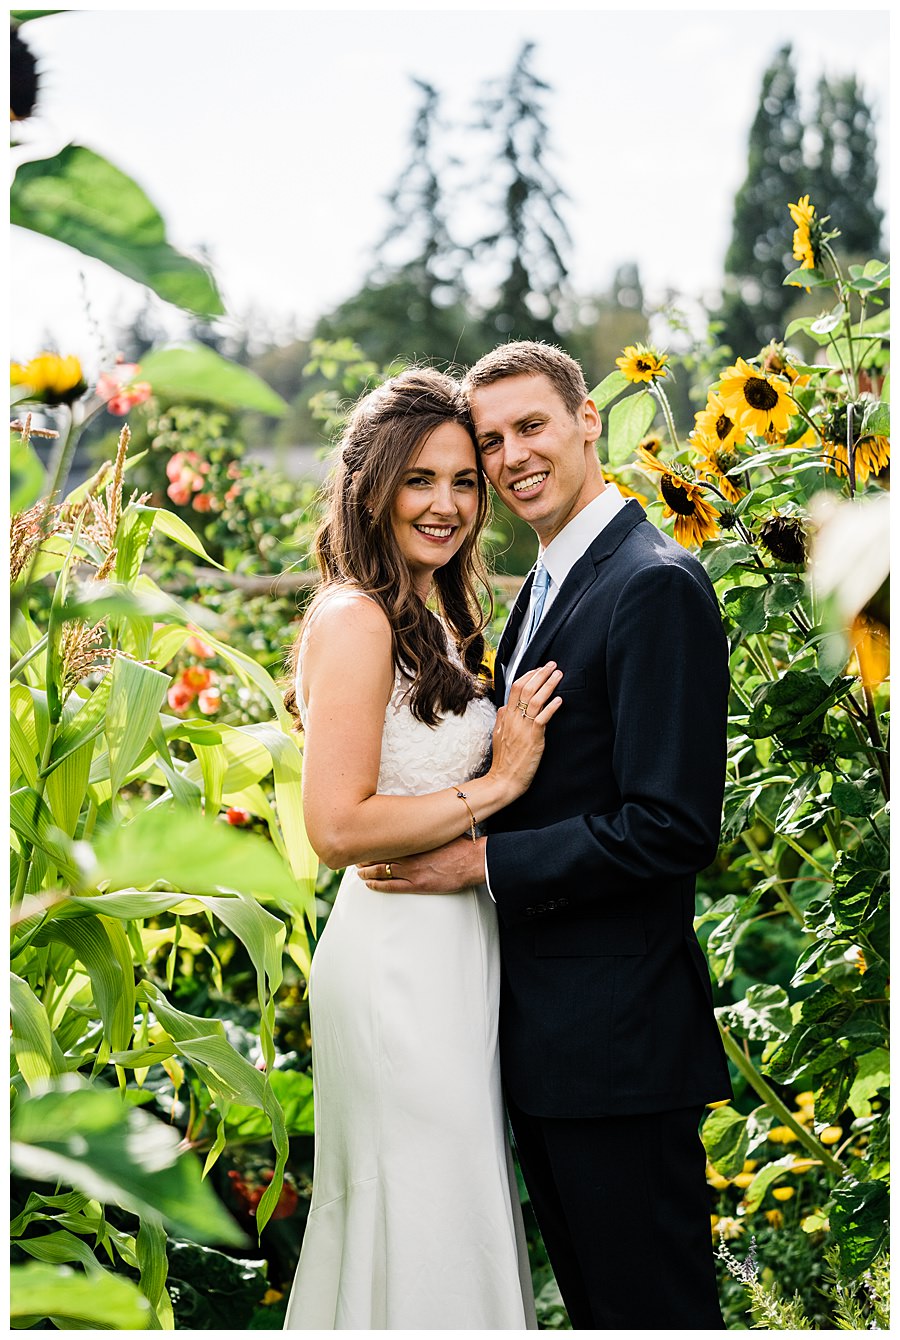 A bride and groom pose among the sunflowers during their Camano Island elopement photographed by Amy Galbraith